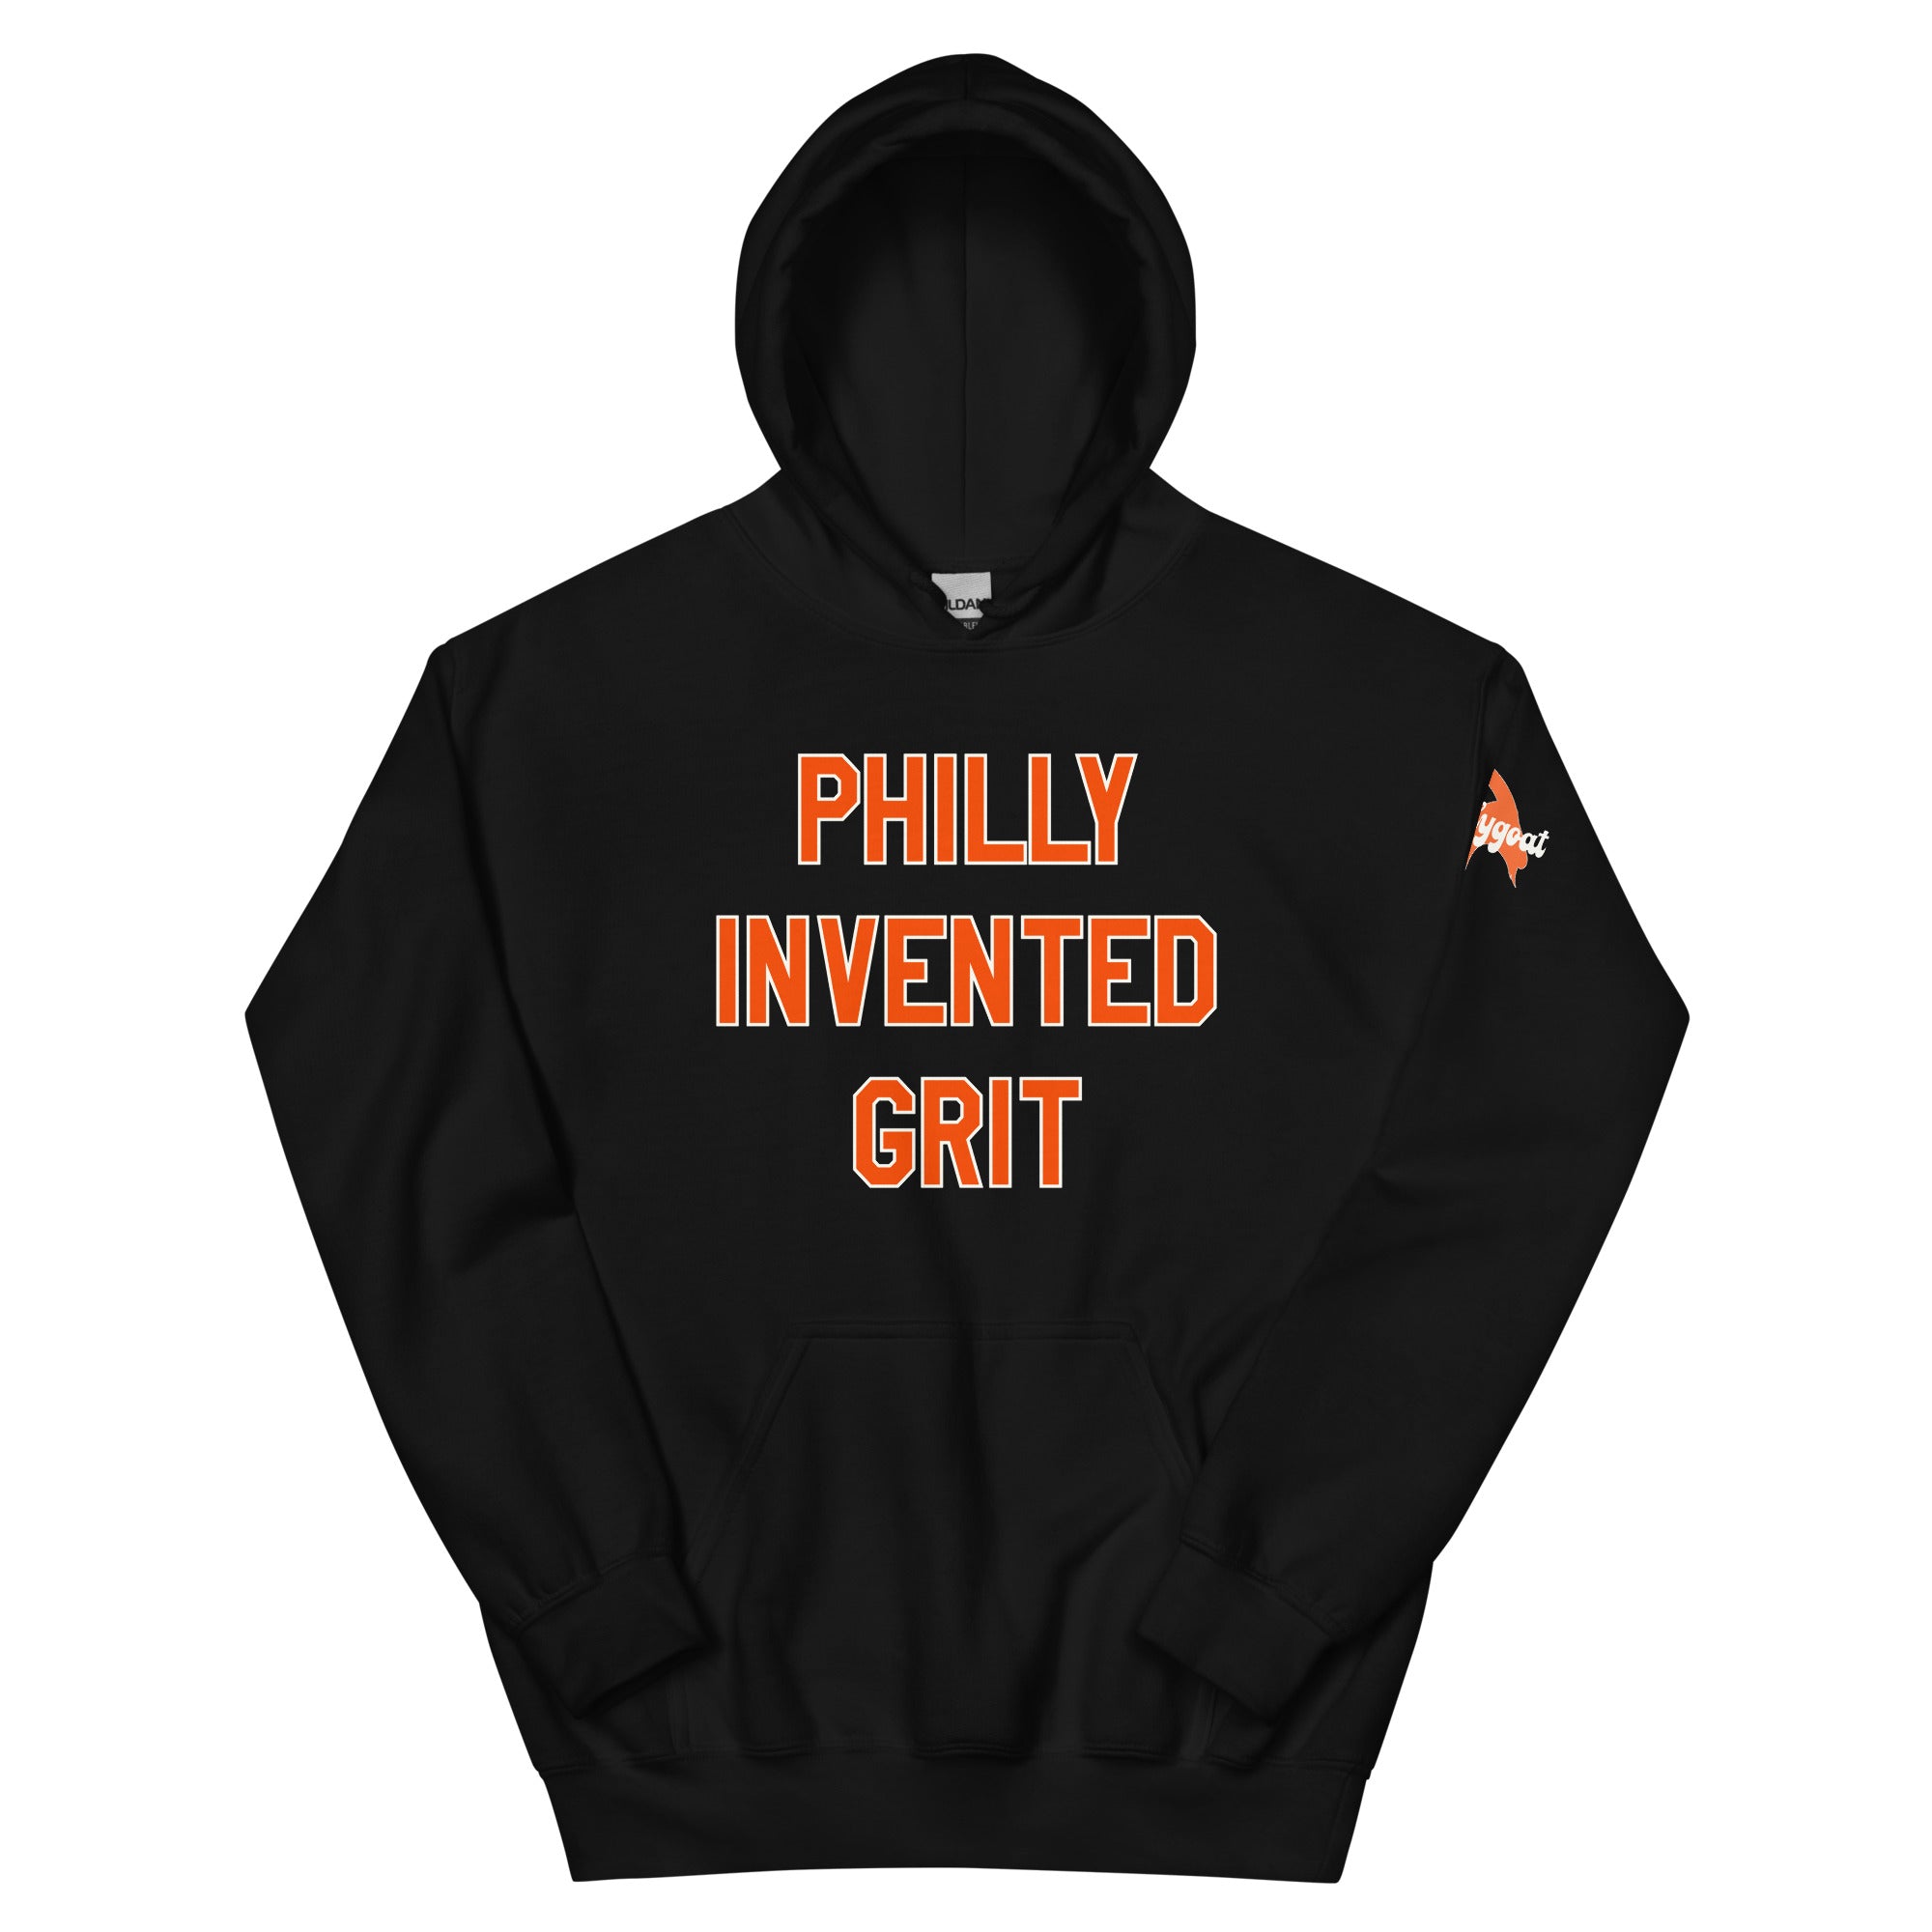 Philadelphia Flyers philly invented grit black hoodie Phillygoat